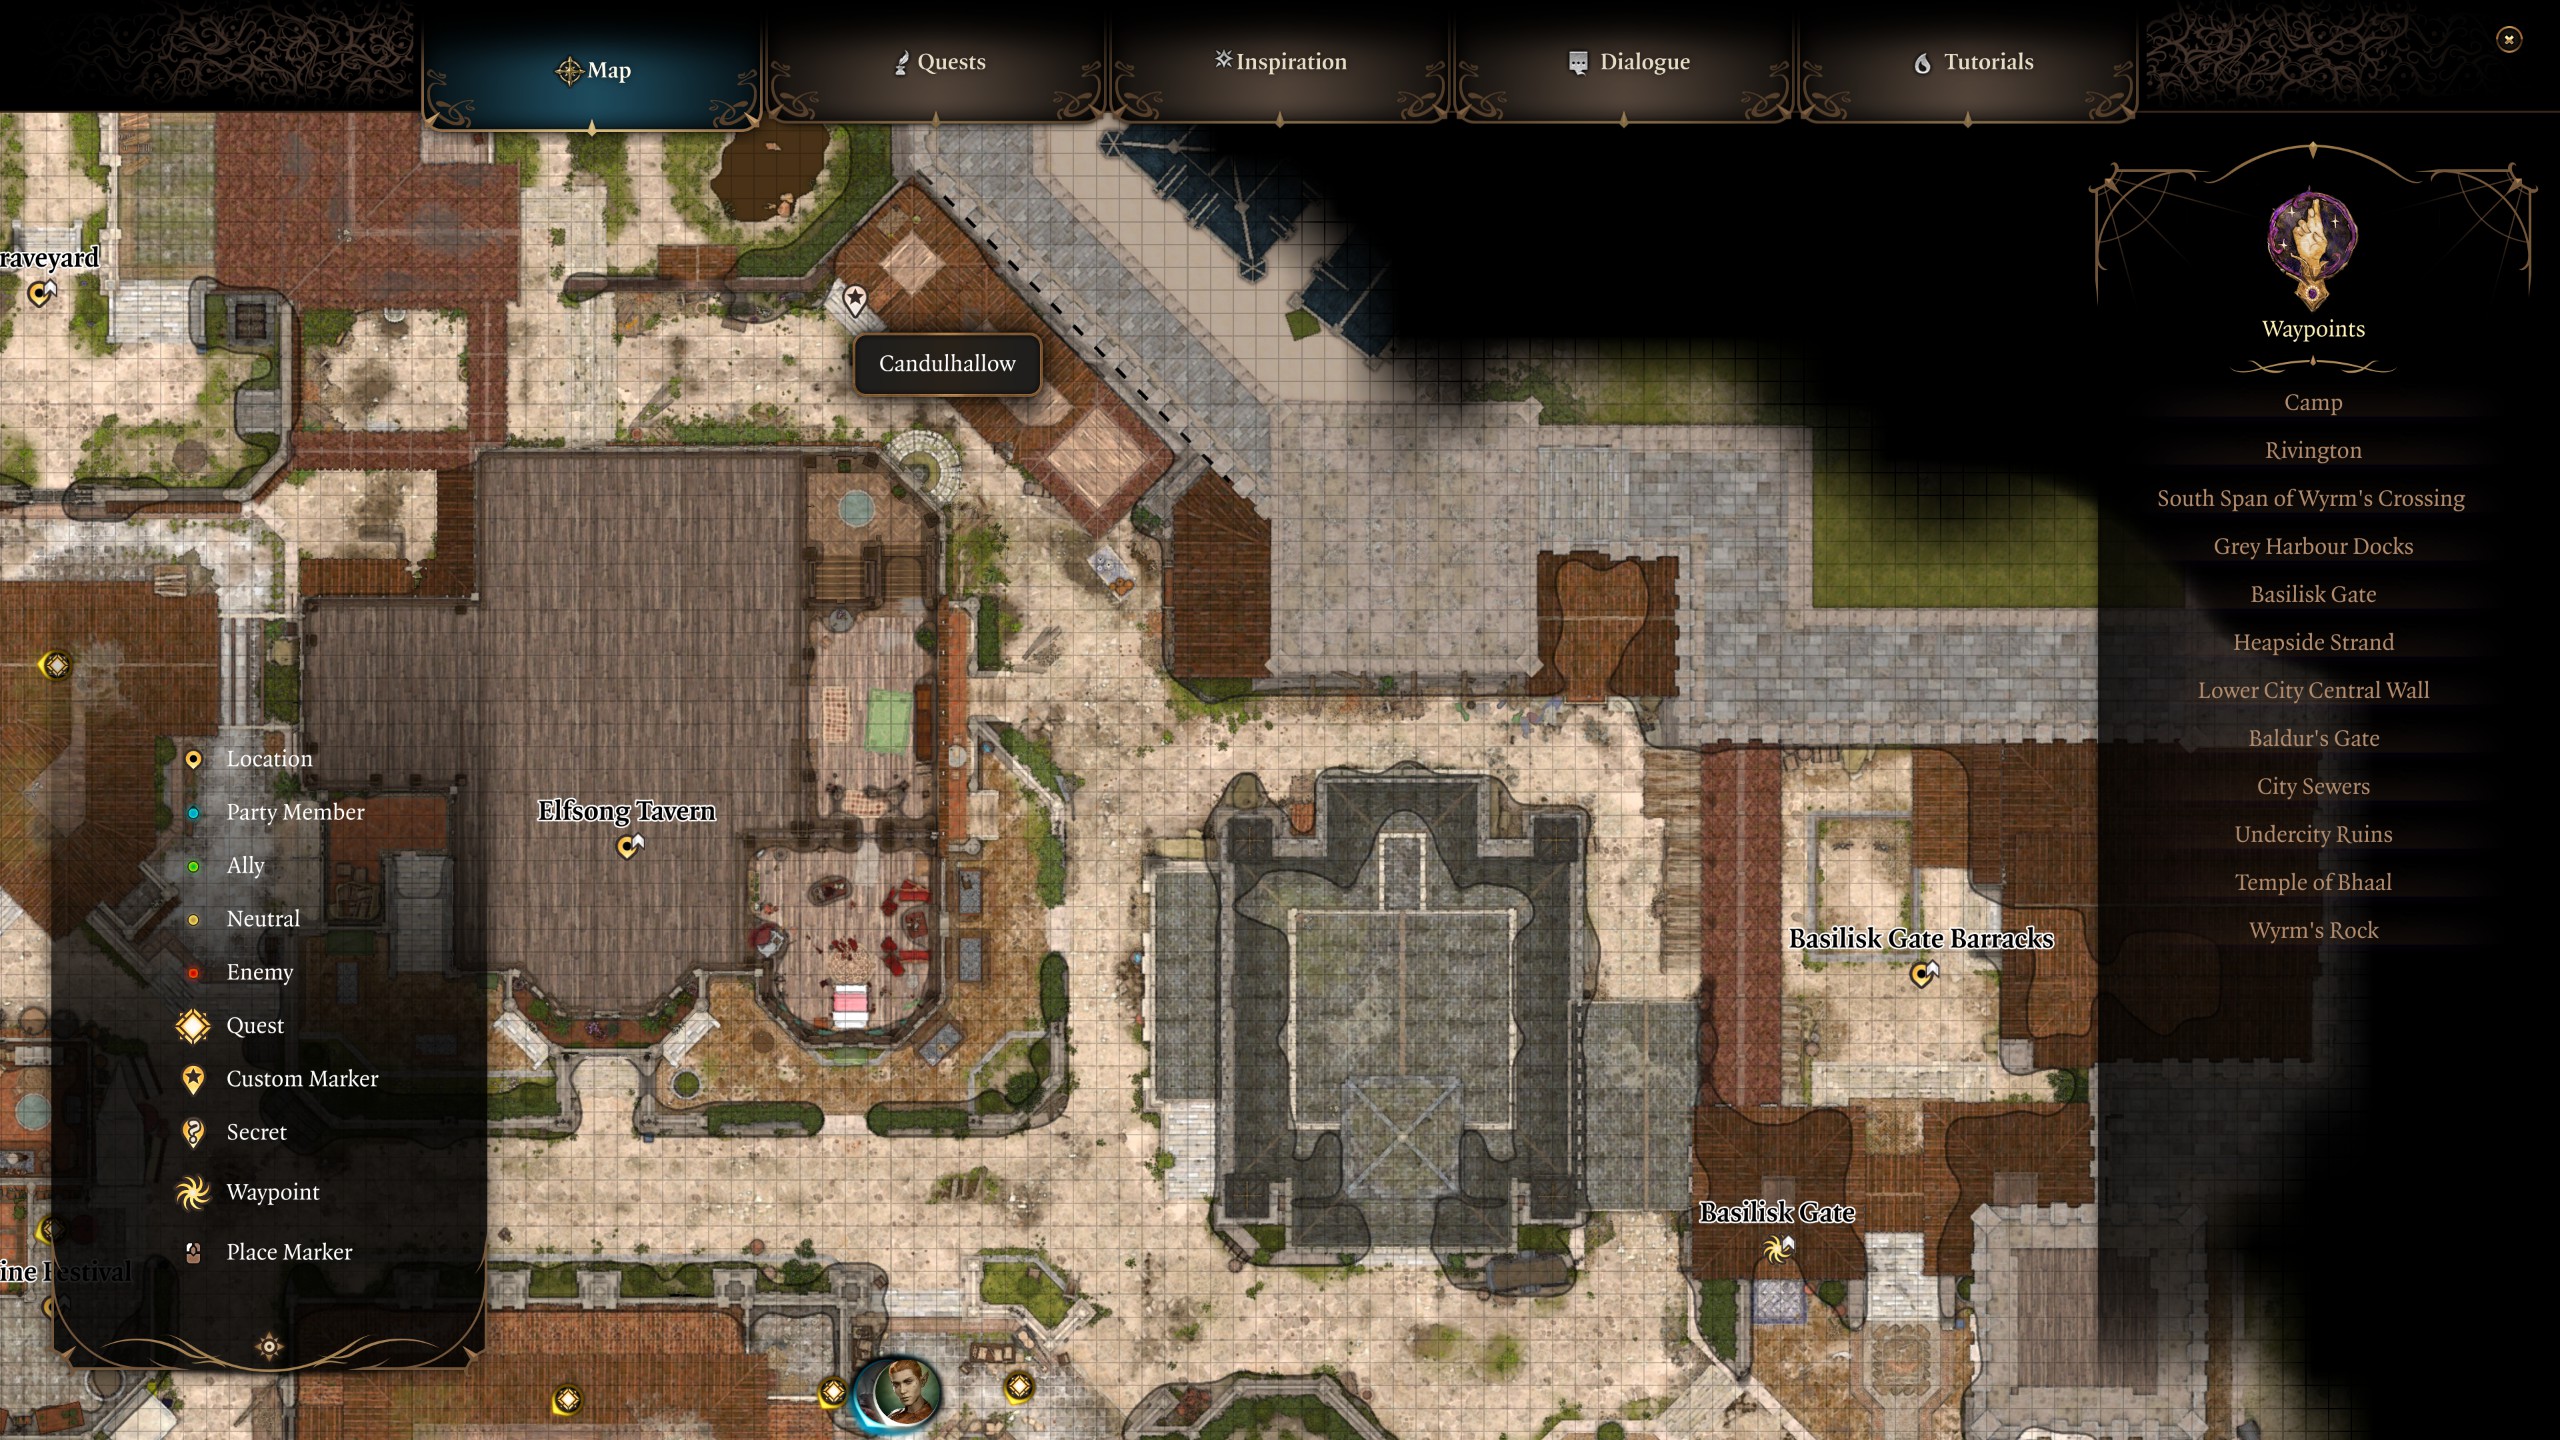 Baldur's Gate 3 Candulhallow Tombstones on the map